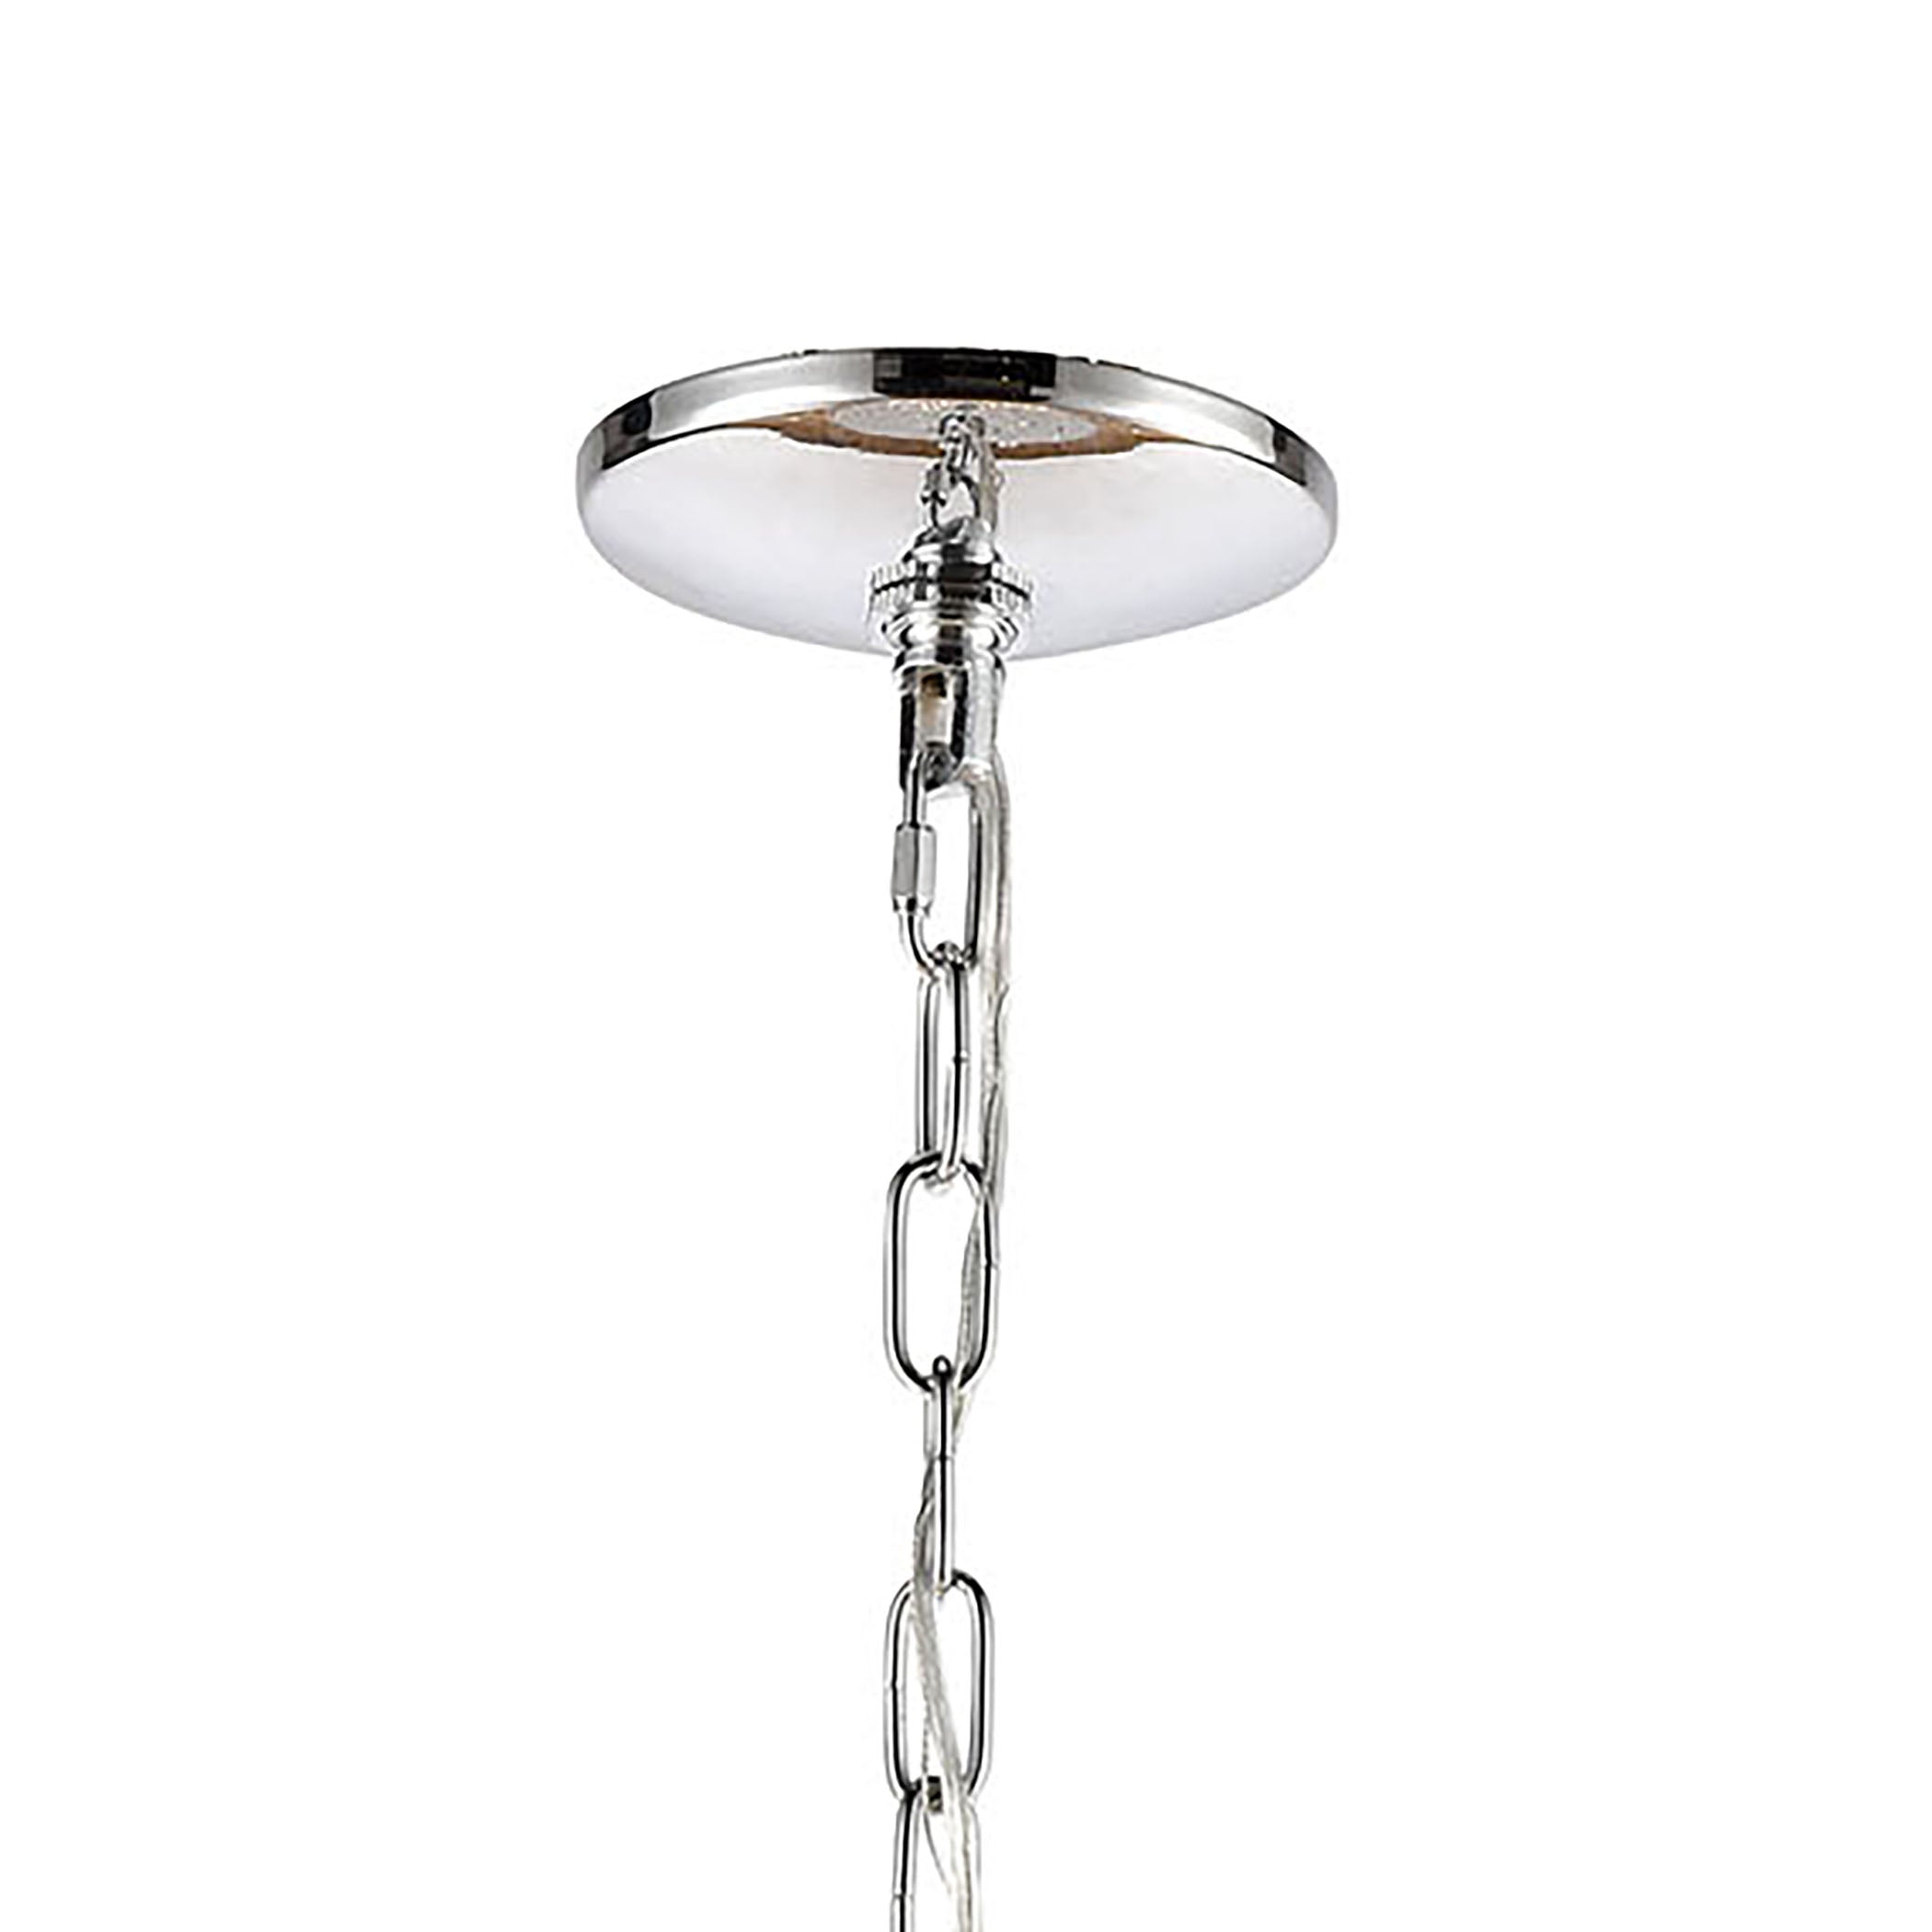 ELK Lighting 45464/12 Crystique 12-Light Chandelier in Polished Chrome with Clear Crystal